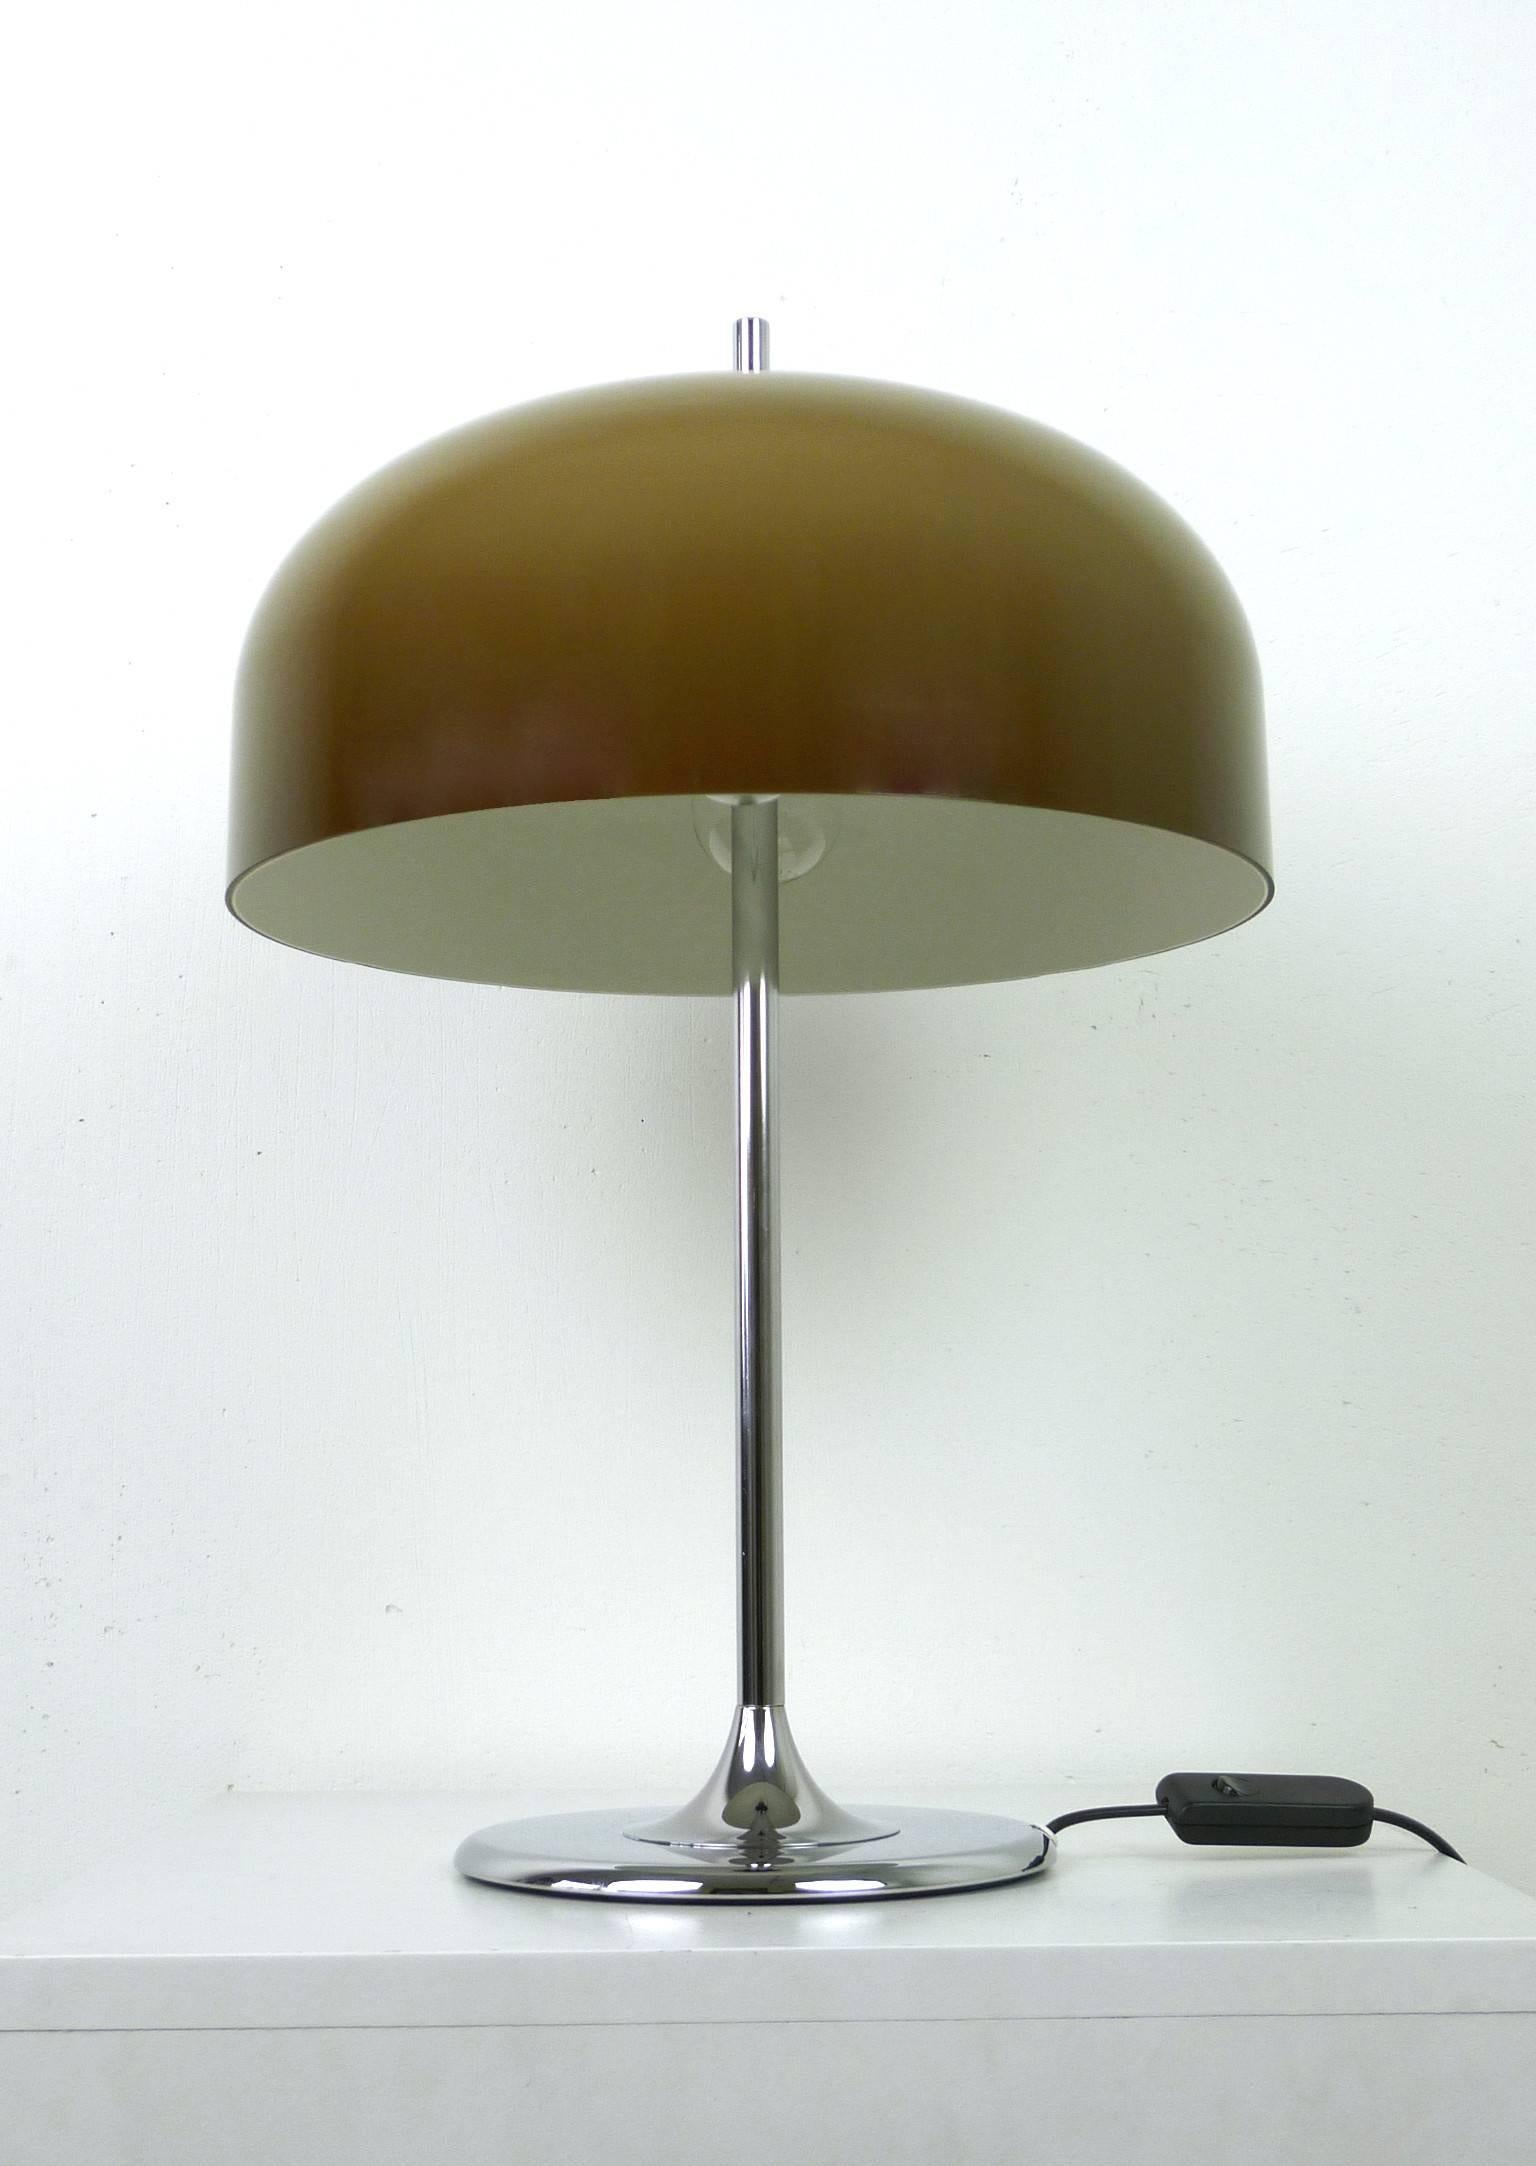 Space Age Chromed Tulip Table Lamp from Germany, 1970s